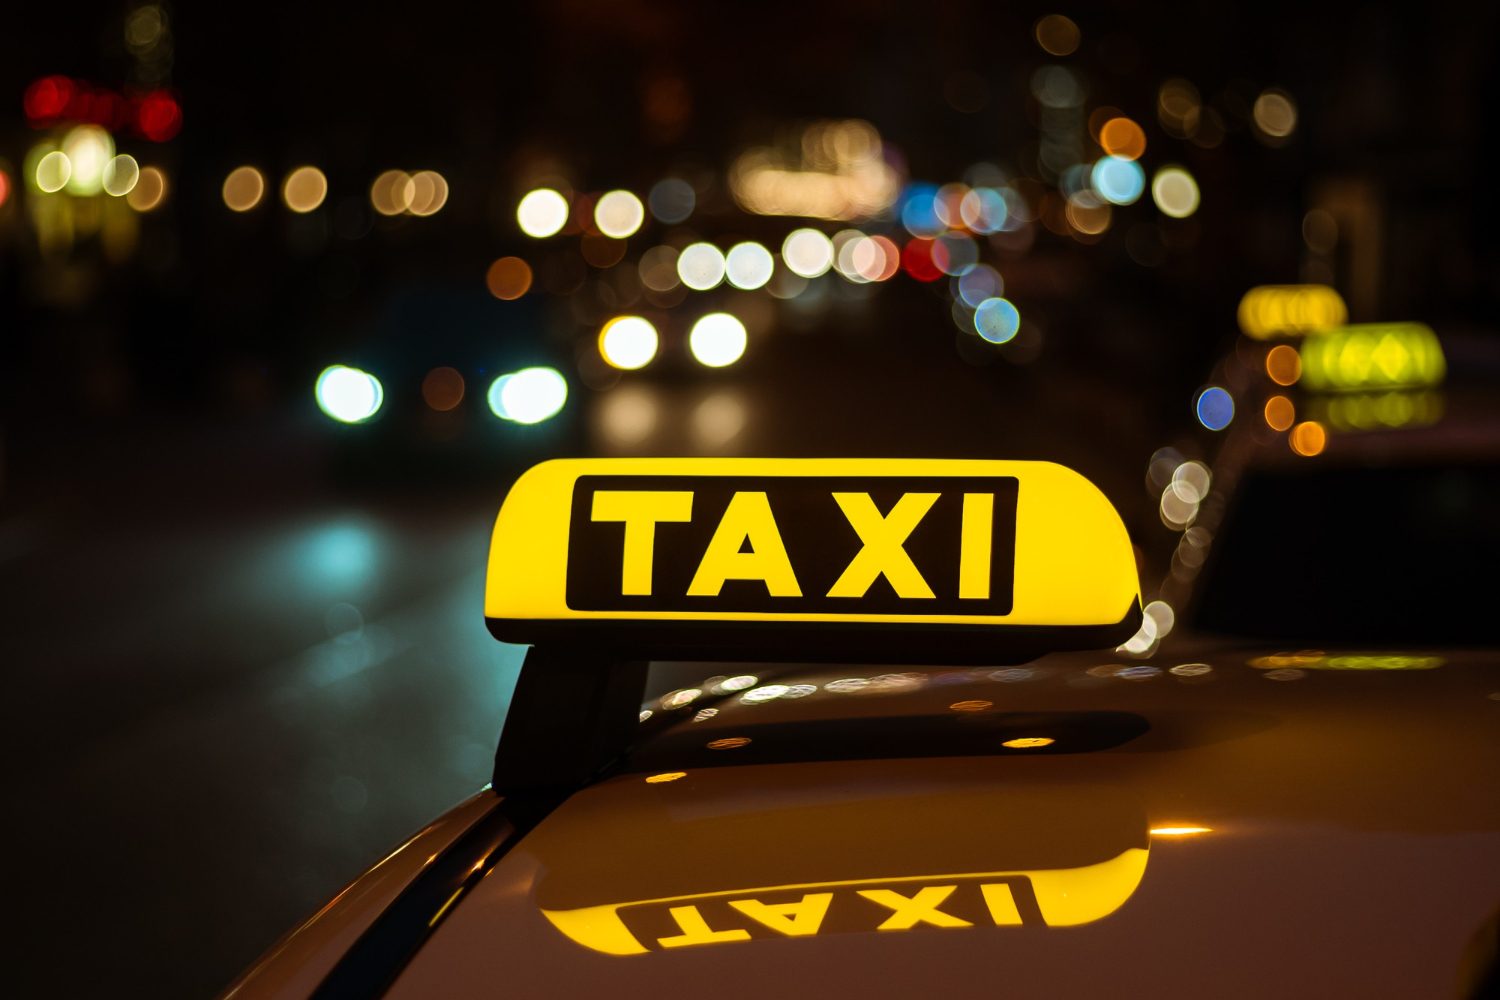 yellow-black-sign-taxi-placed-top-car-night